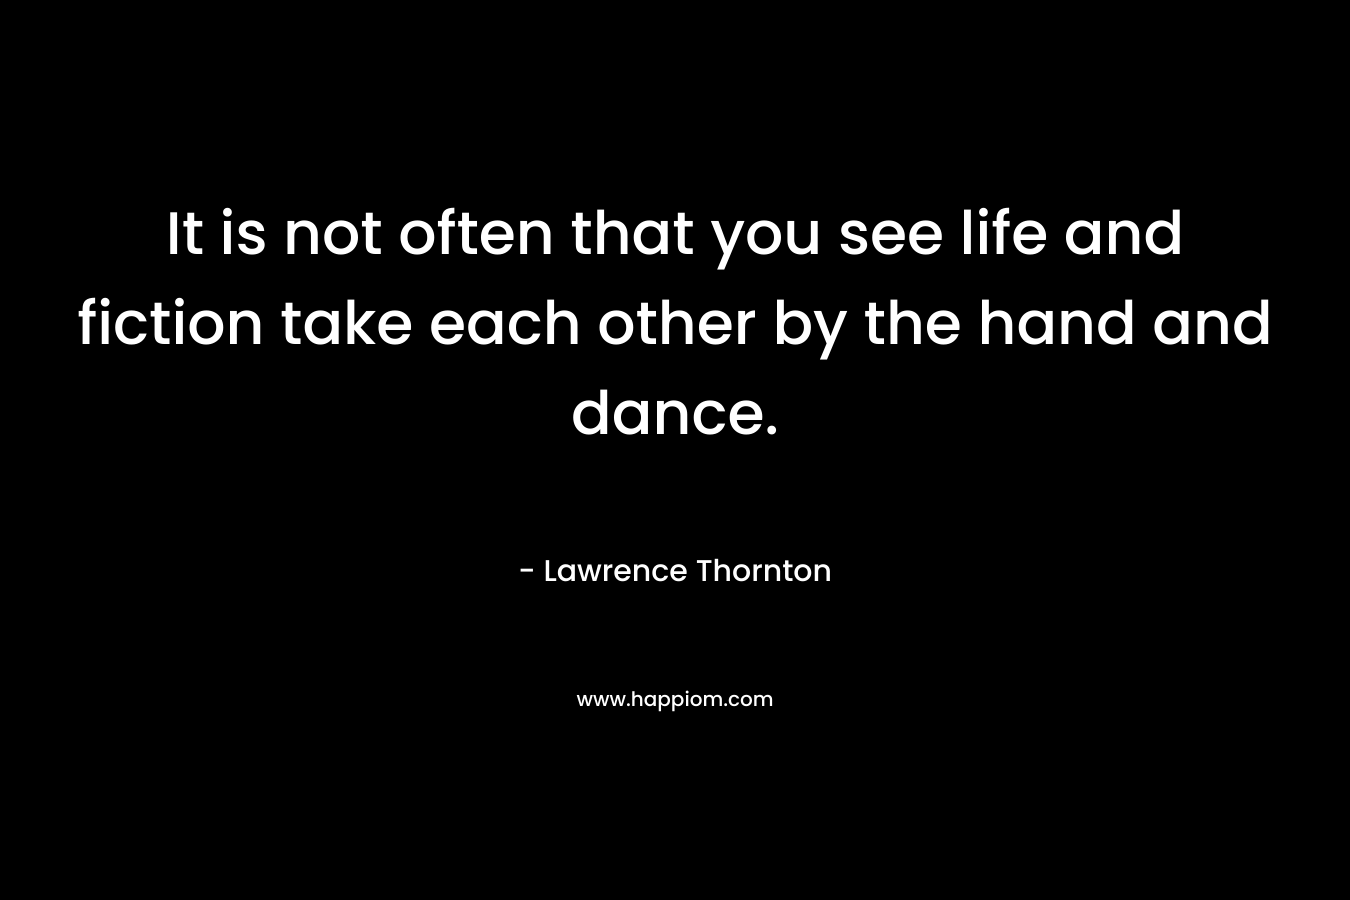 It is not often that you see life and fiction take each other by the hand and dance.